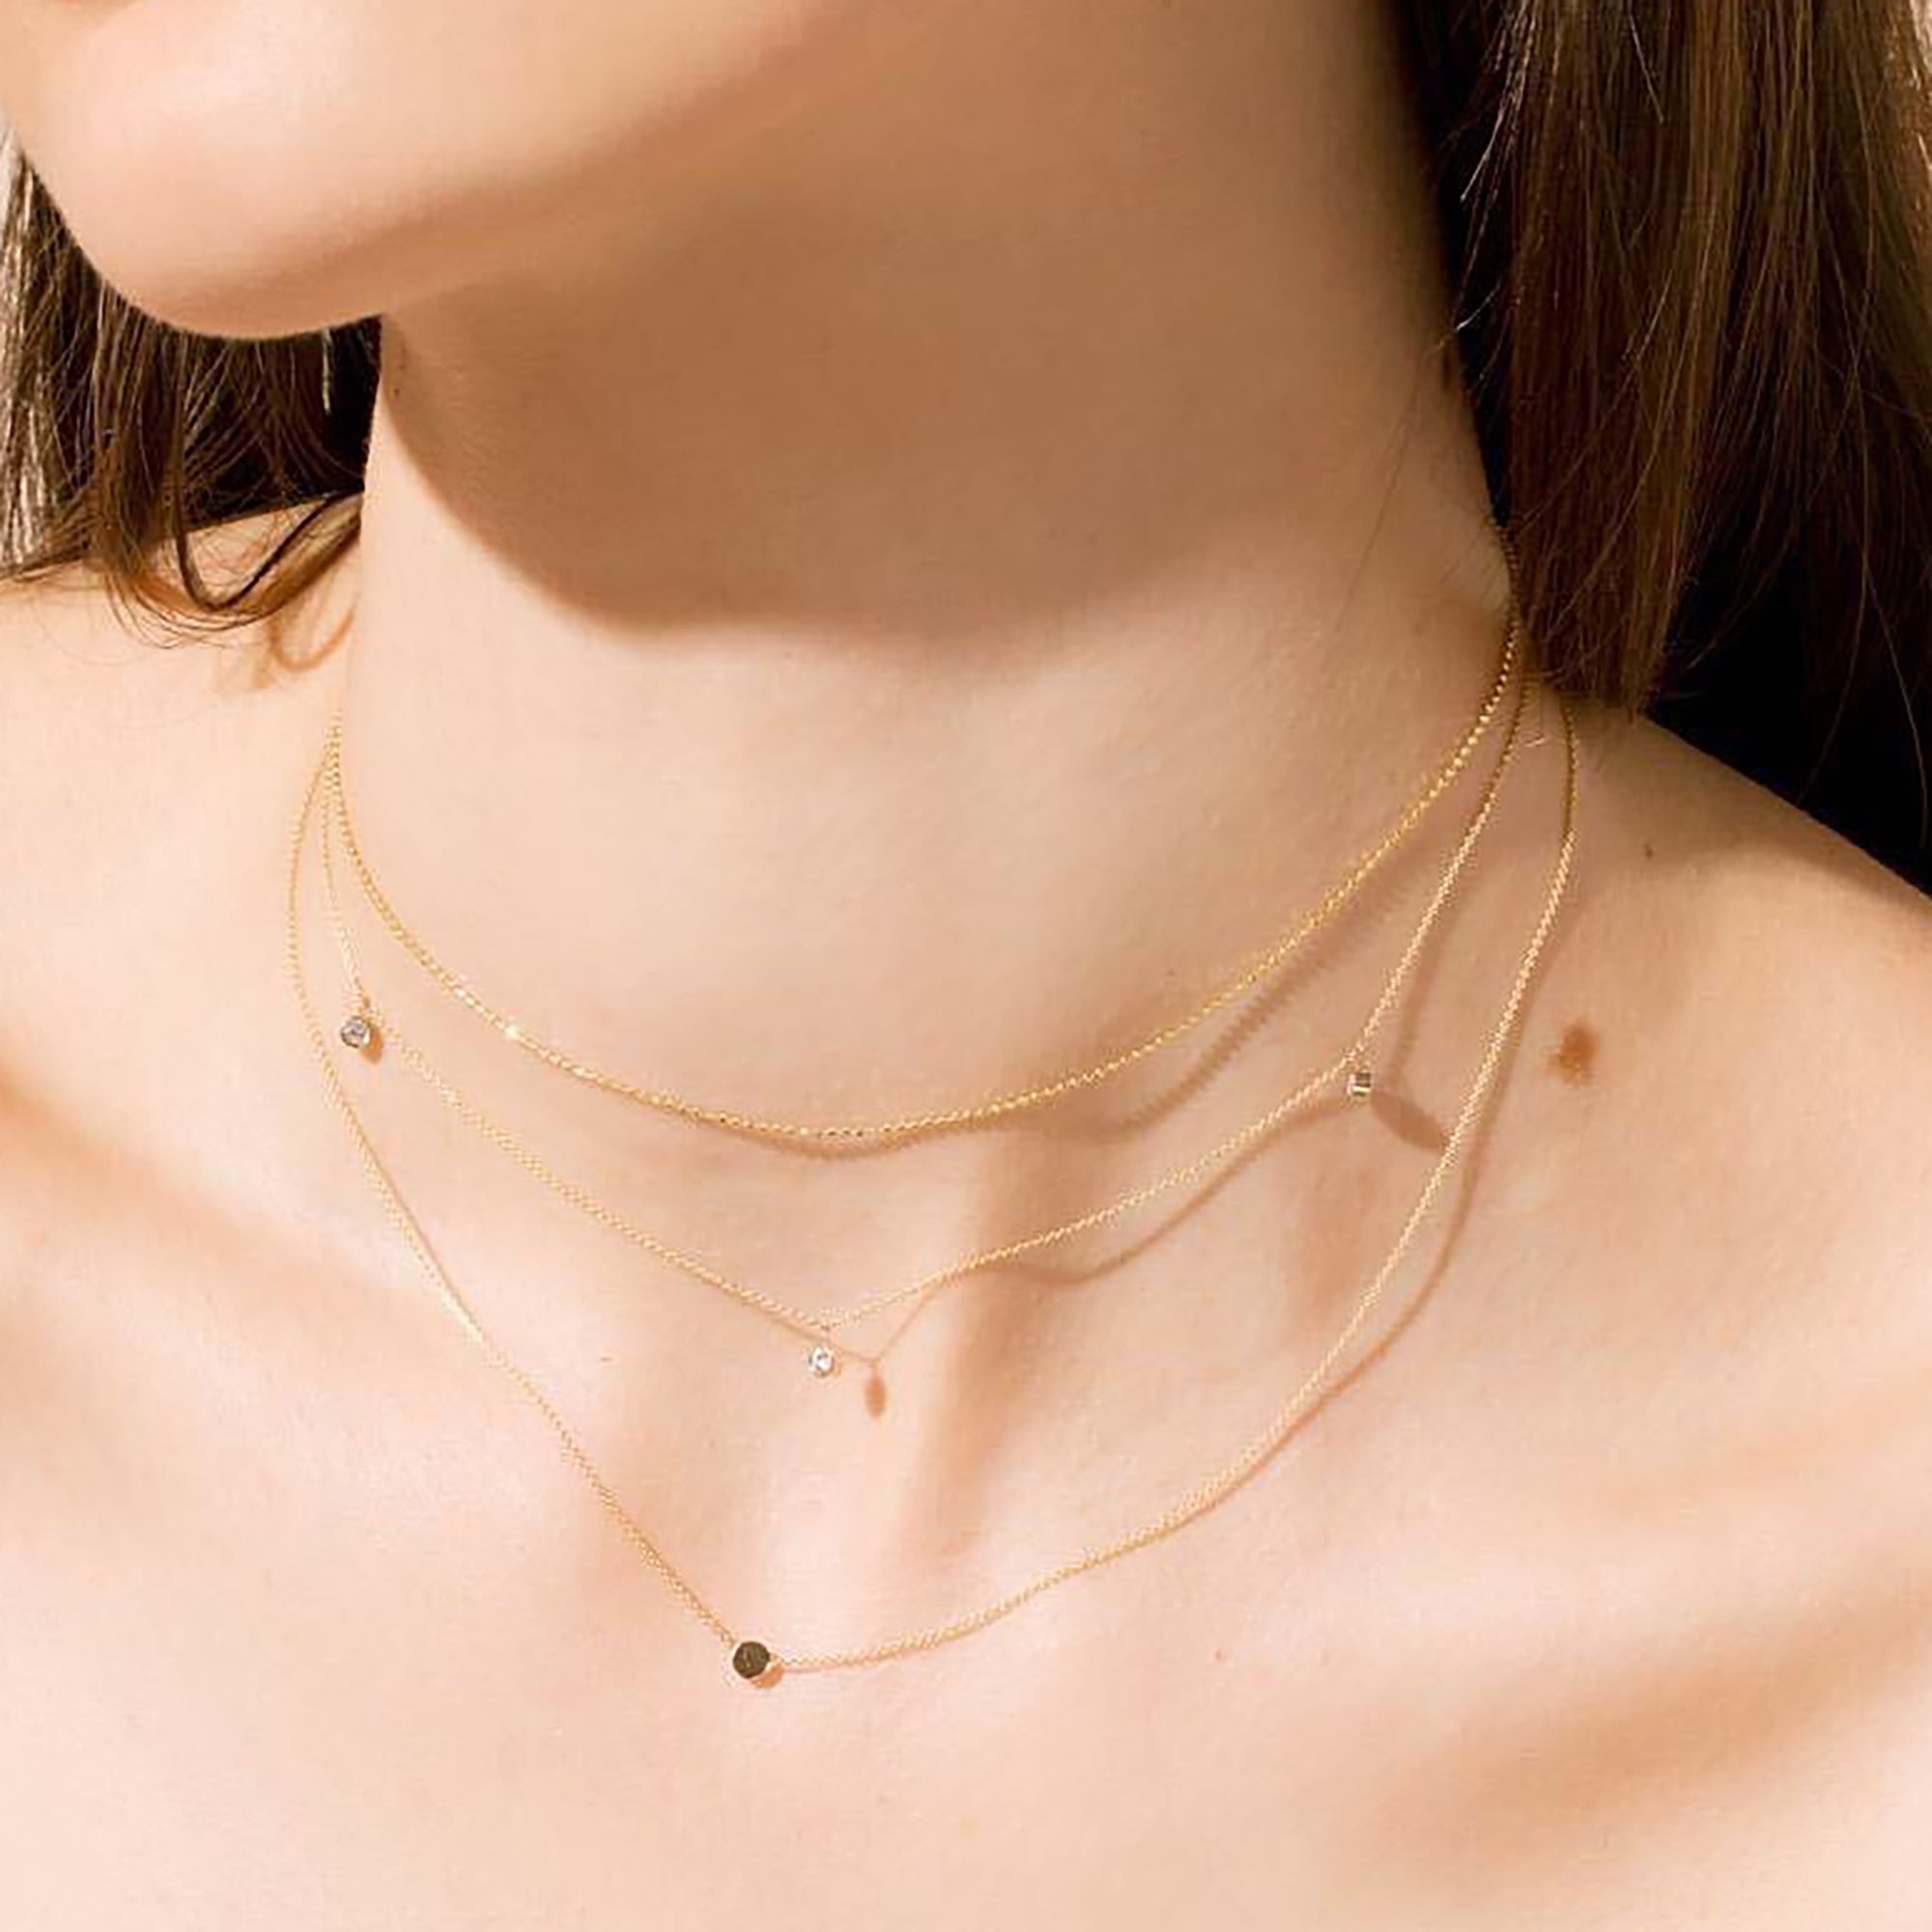 Thin gold chain necklace, delicate gold chain, everyday necklace, gold  choker necklace, dainty simple chain necklace, gold plated chain